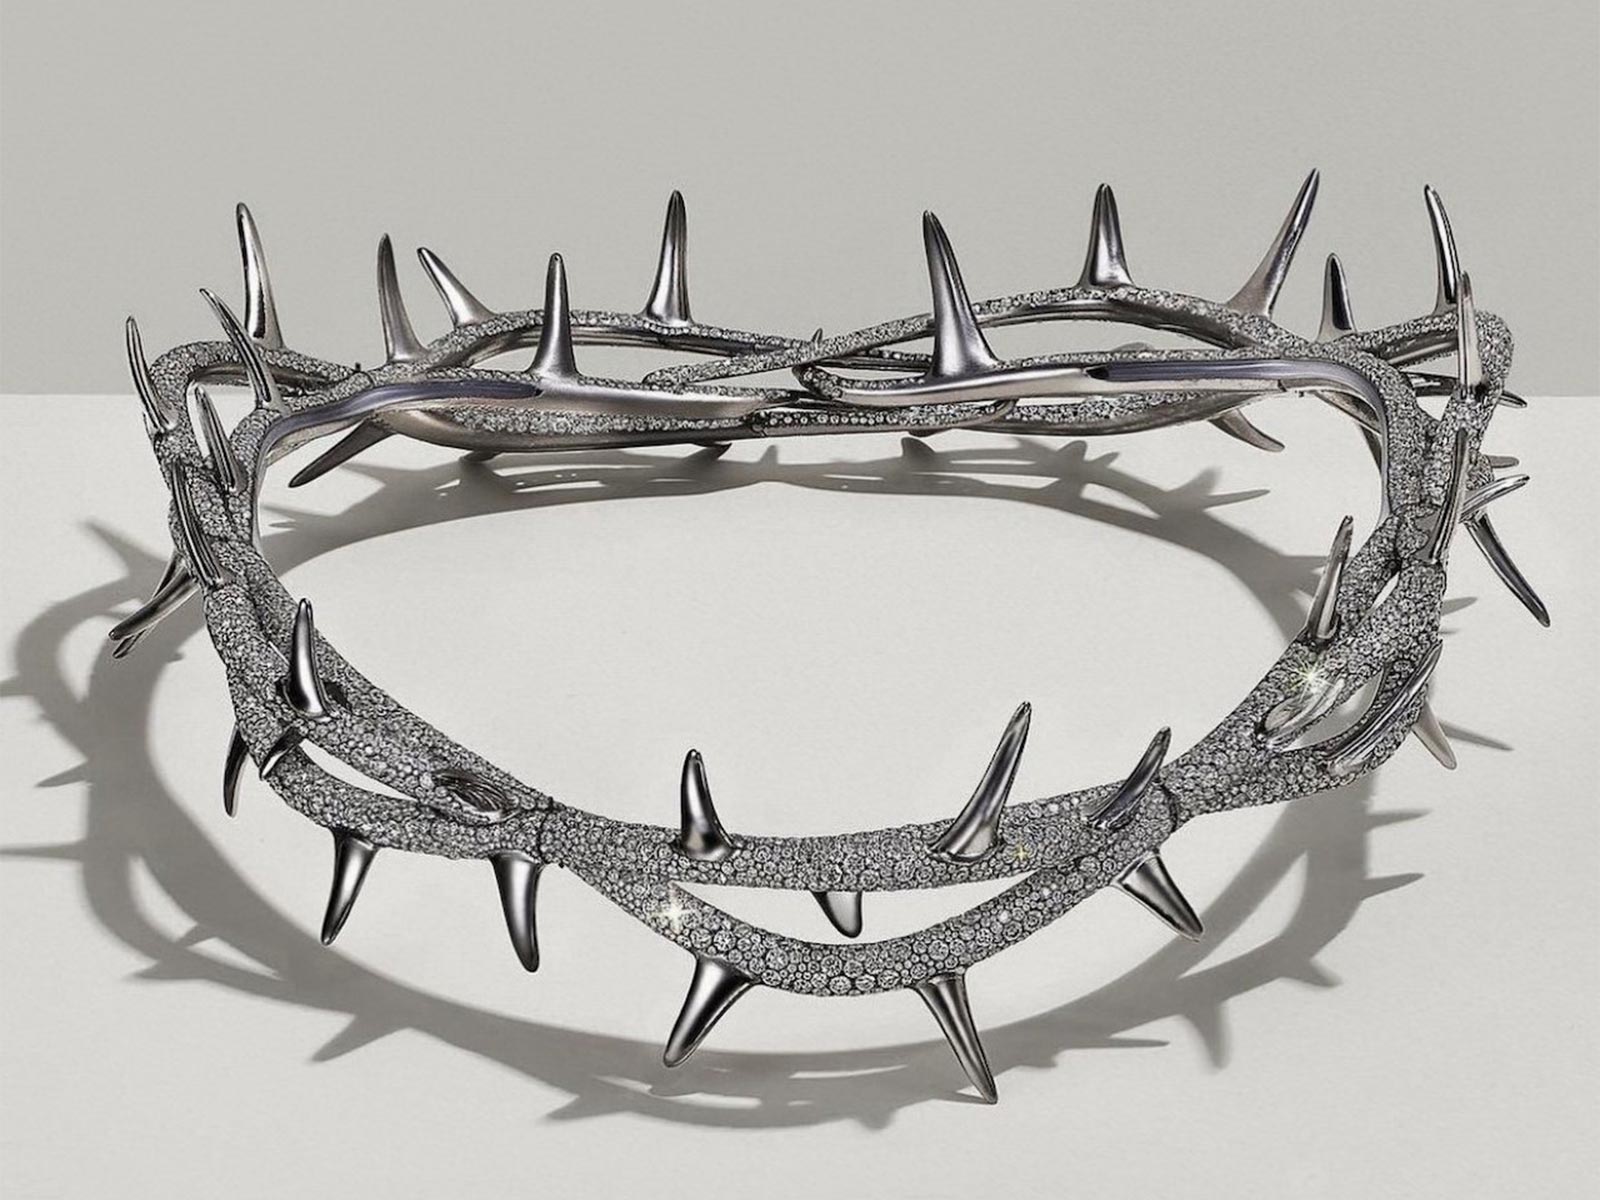 Kendrick Lamar's Crown of Thorns by Tiffany & Co. Has Over 8,000 Diamonds